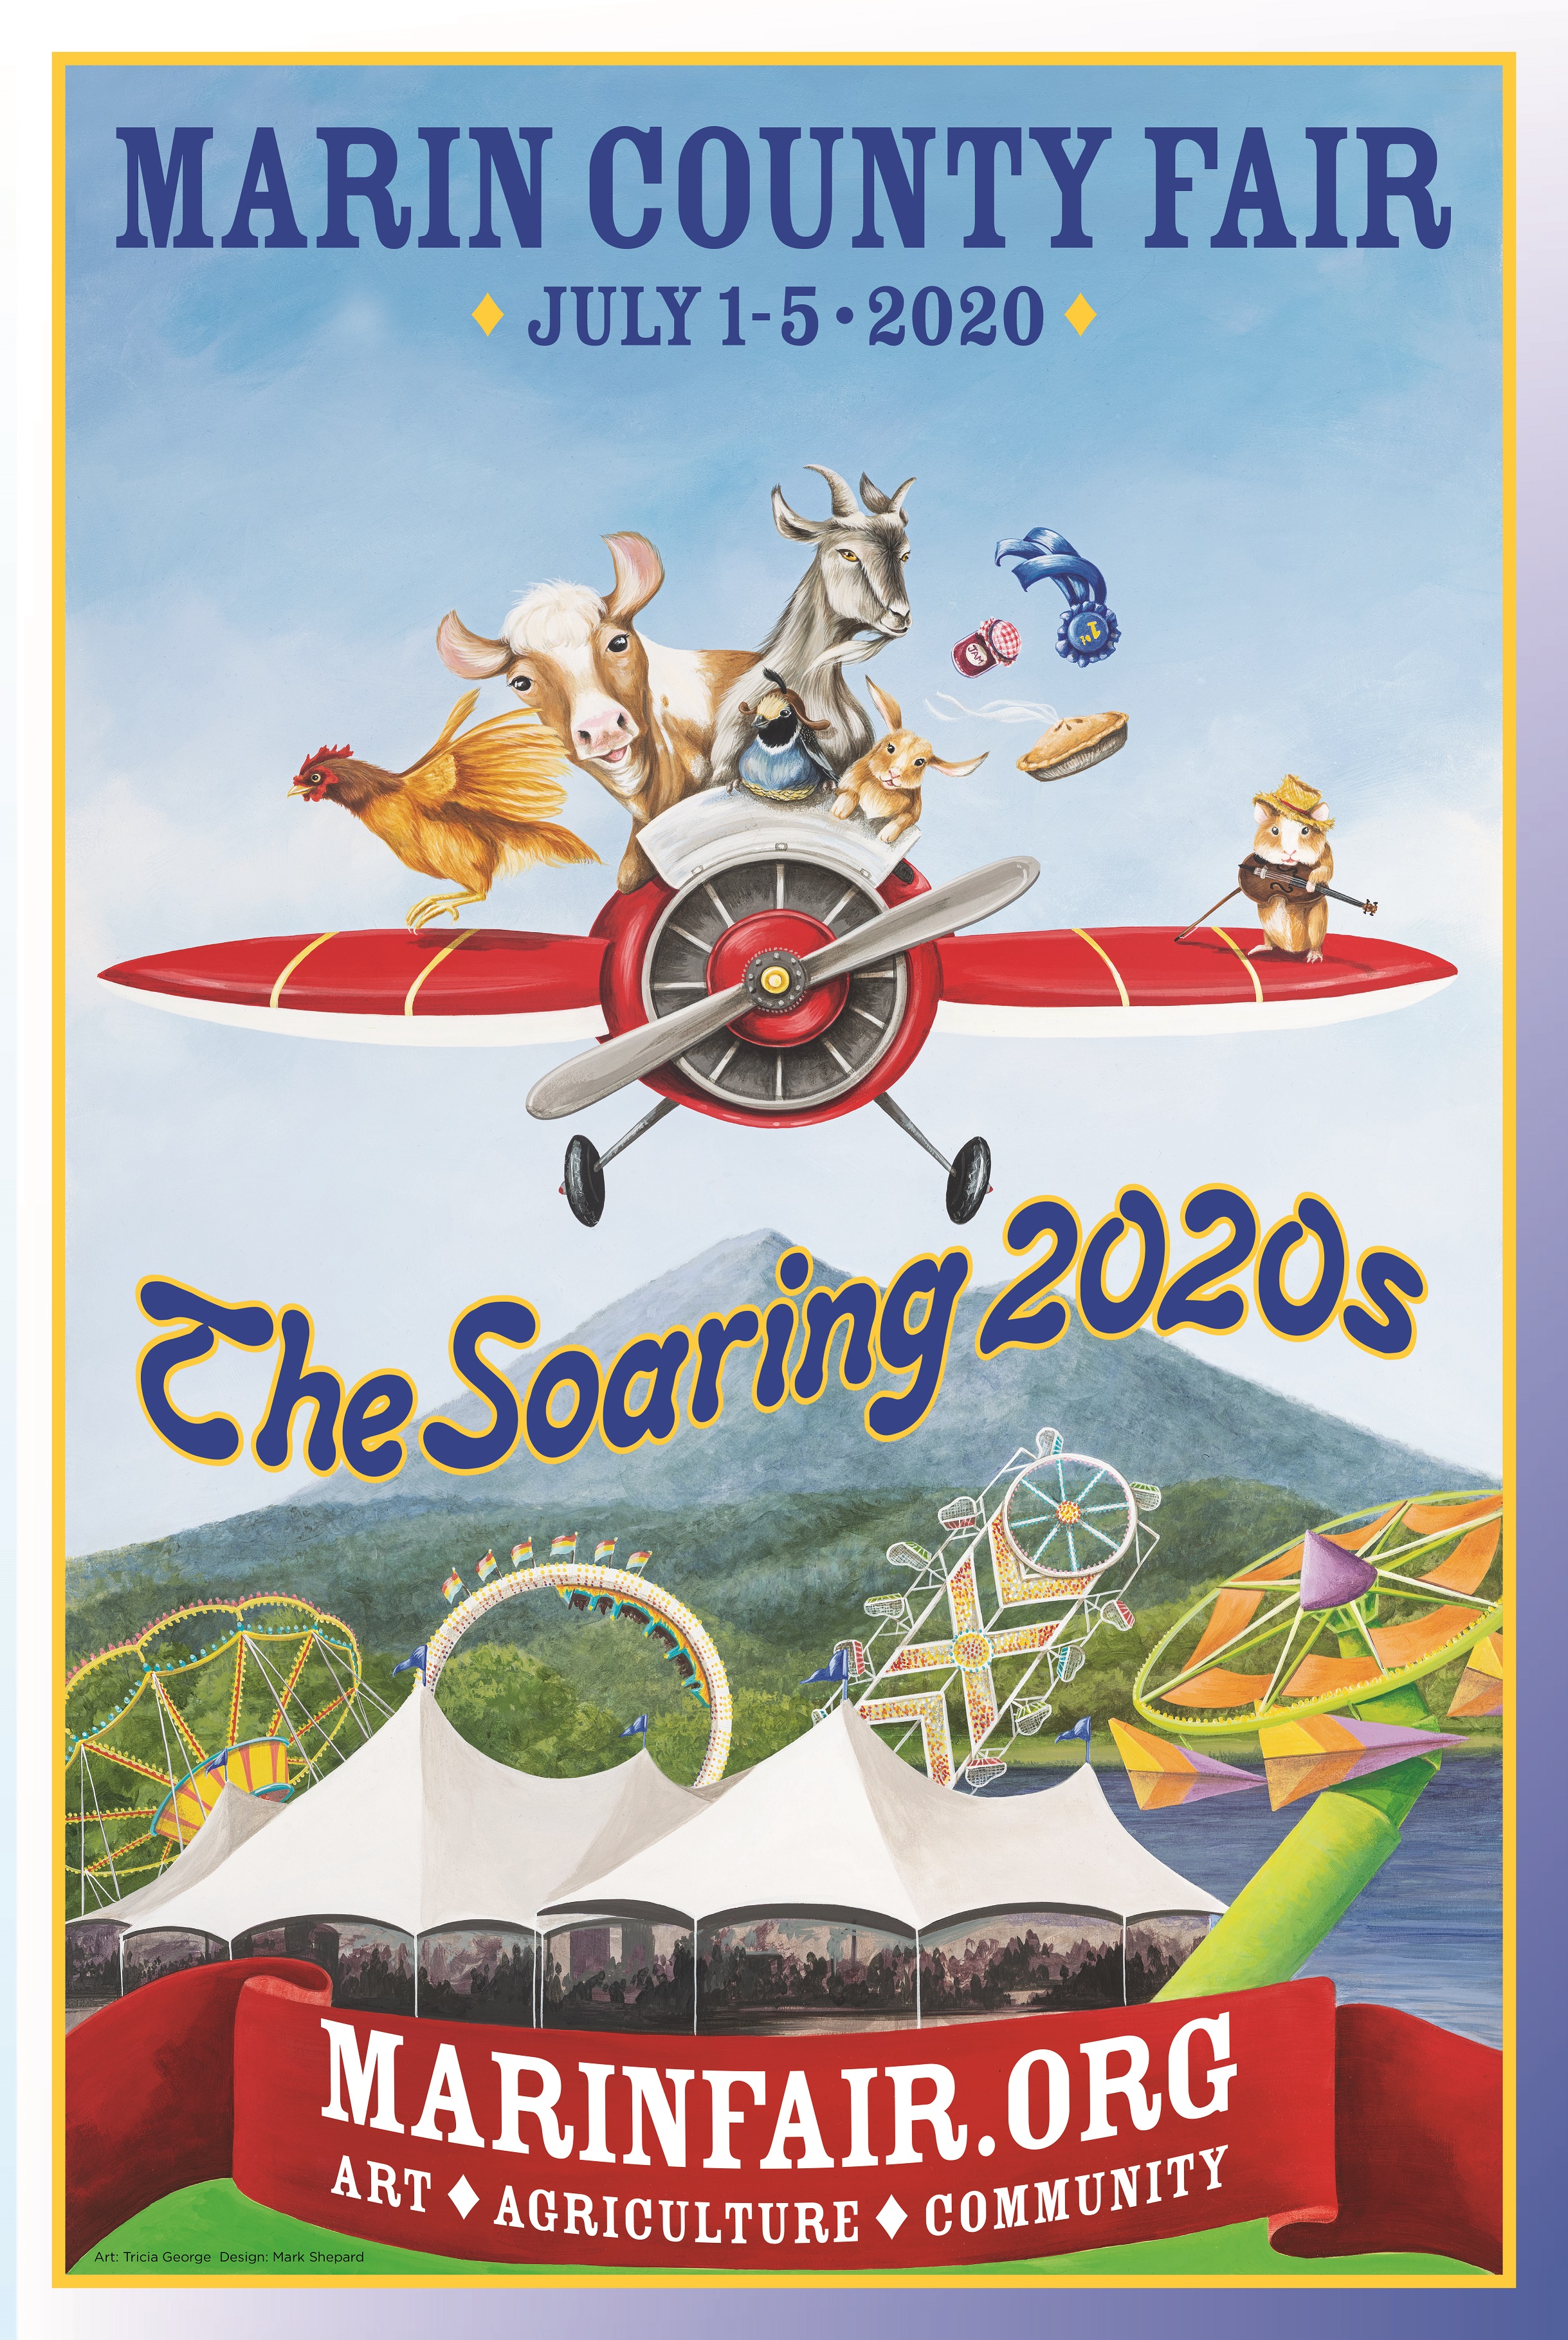 Marin County Fair poster features caricatures of farm animals flying in an antique plane 